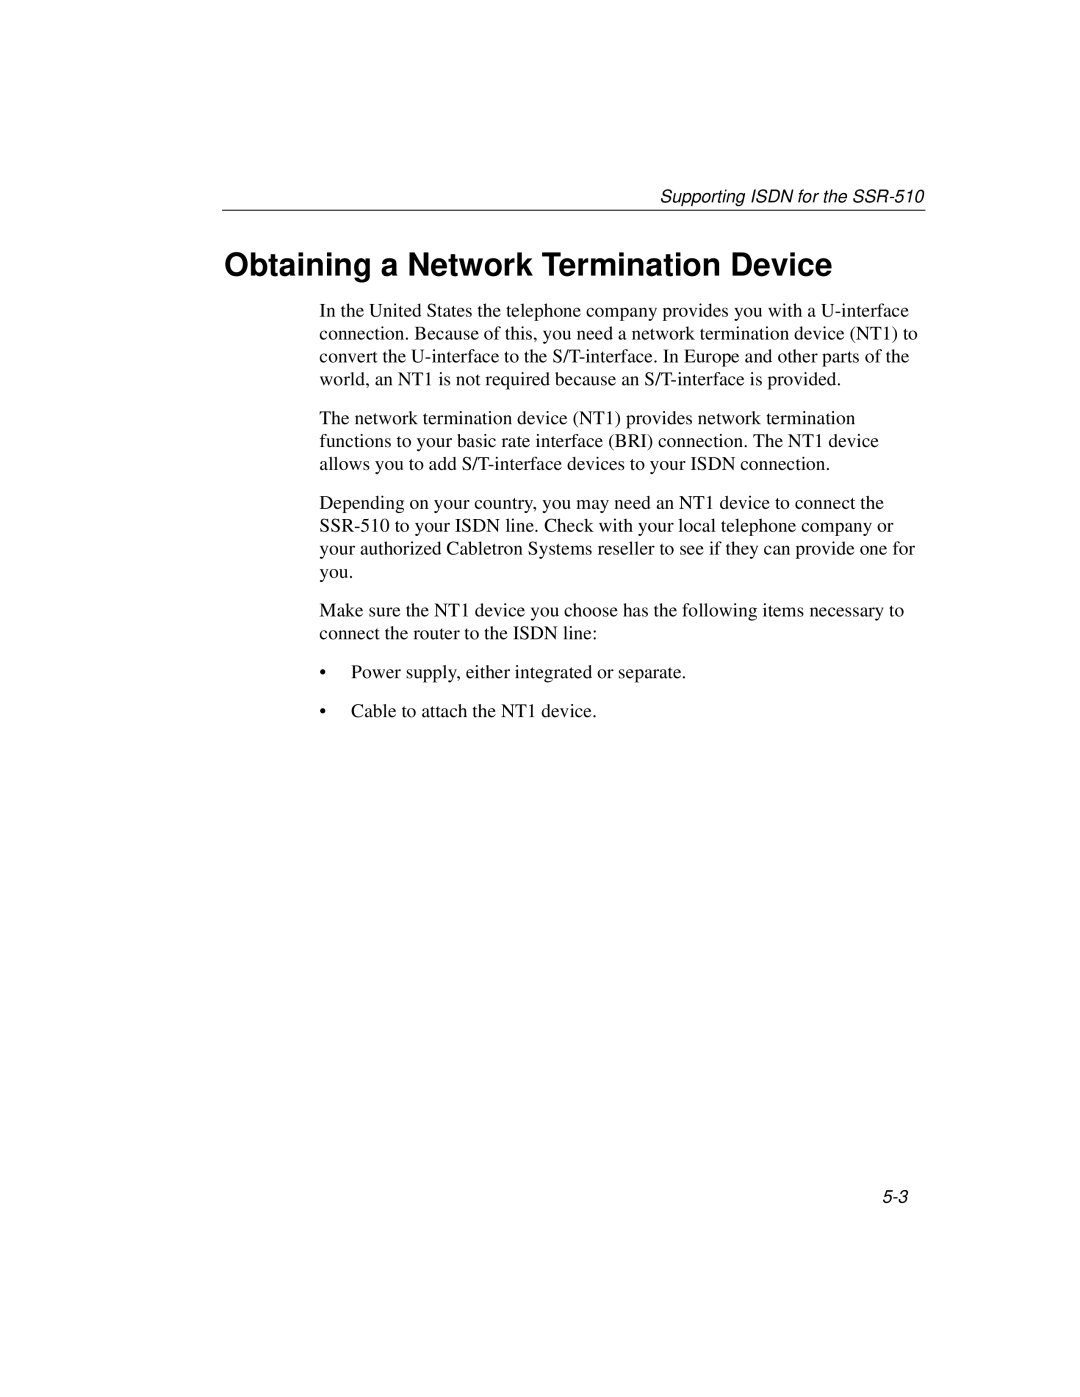 Cabletron Systems 520, 510 manual Obtaining a Network Termination Device 